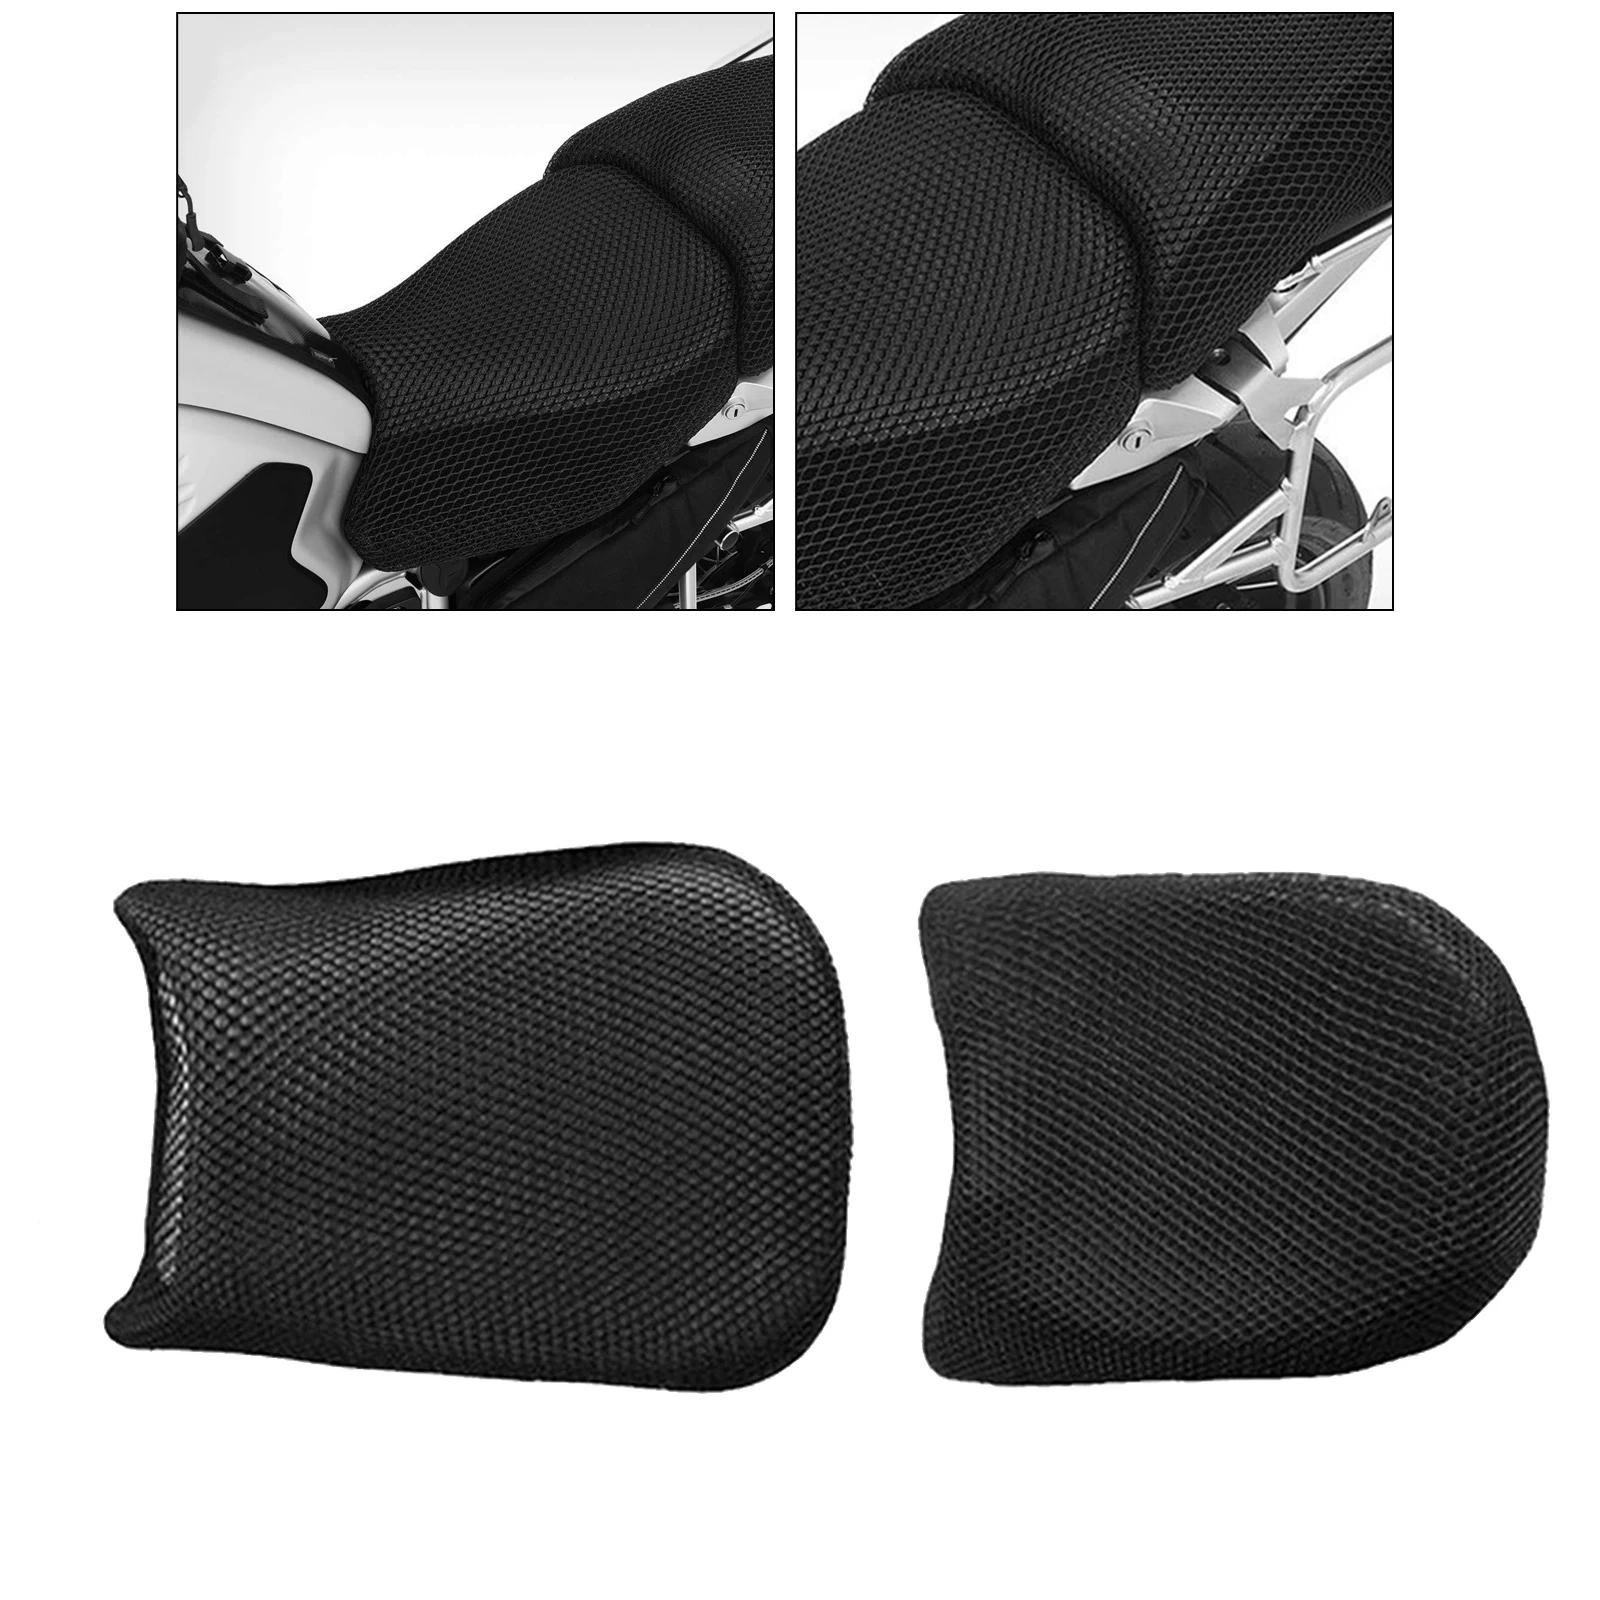 Motorcycle Bikes Protecting Comfort Seat  Covers Comfortable For  R1200GS R 1200 GS